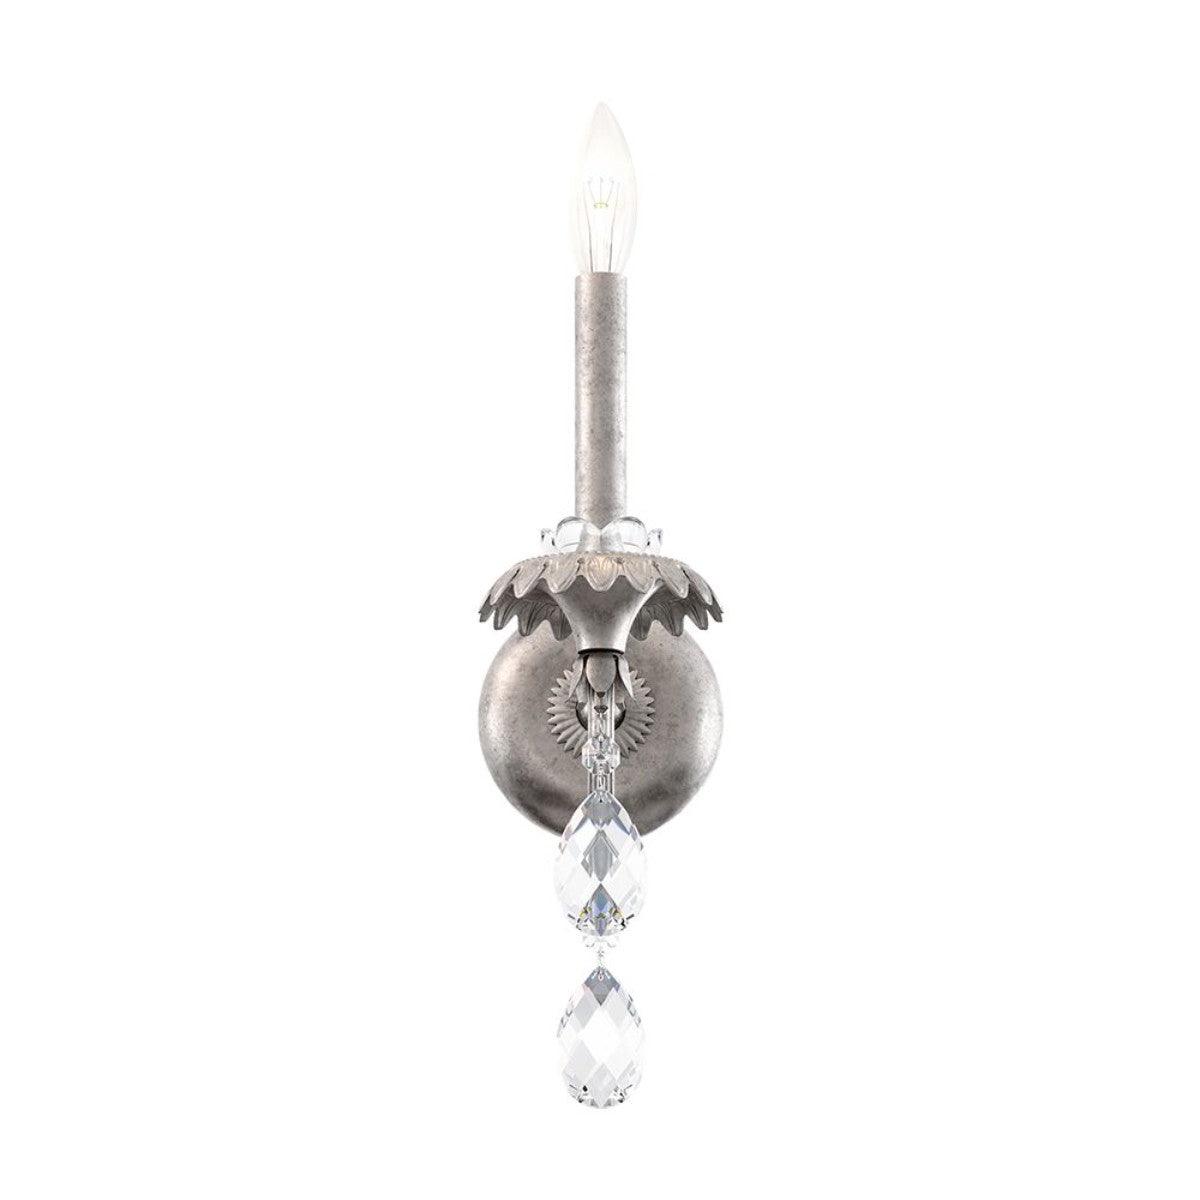 Helenia 17 inch Armed Sconce with Clear Heritage Crystals - Bees Lighting